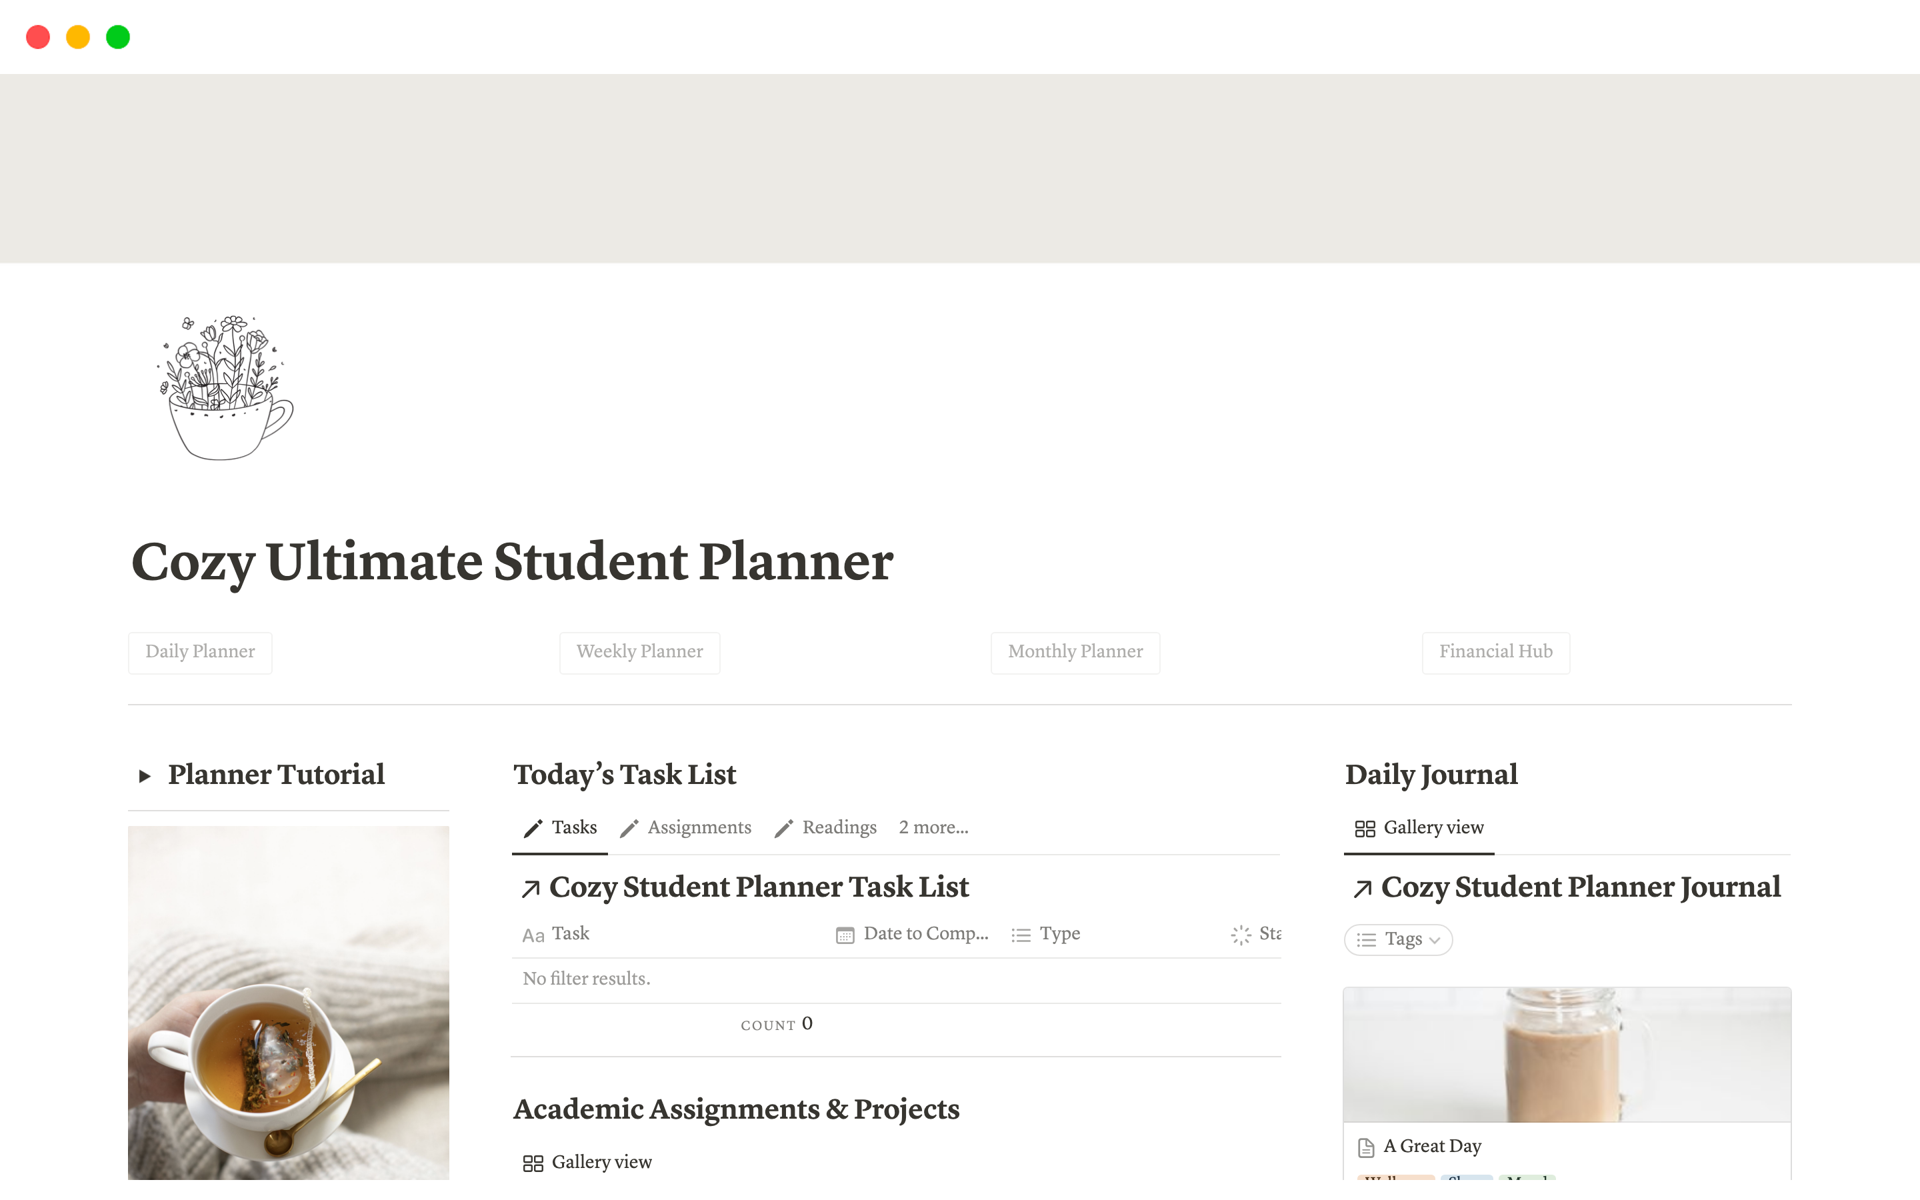 All in one academic and personal planner for students with cozy aesthetic.